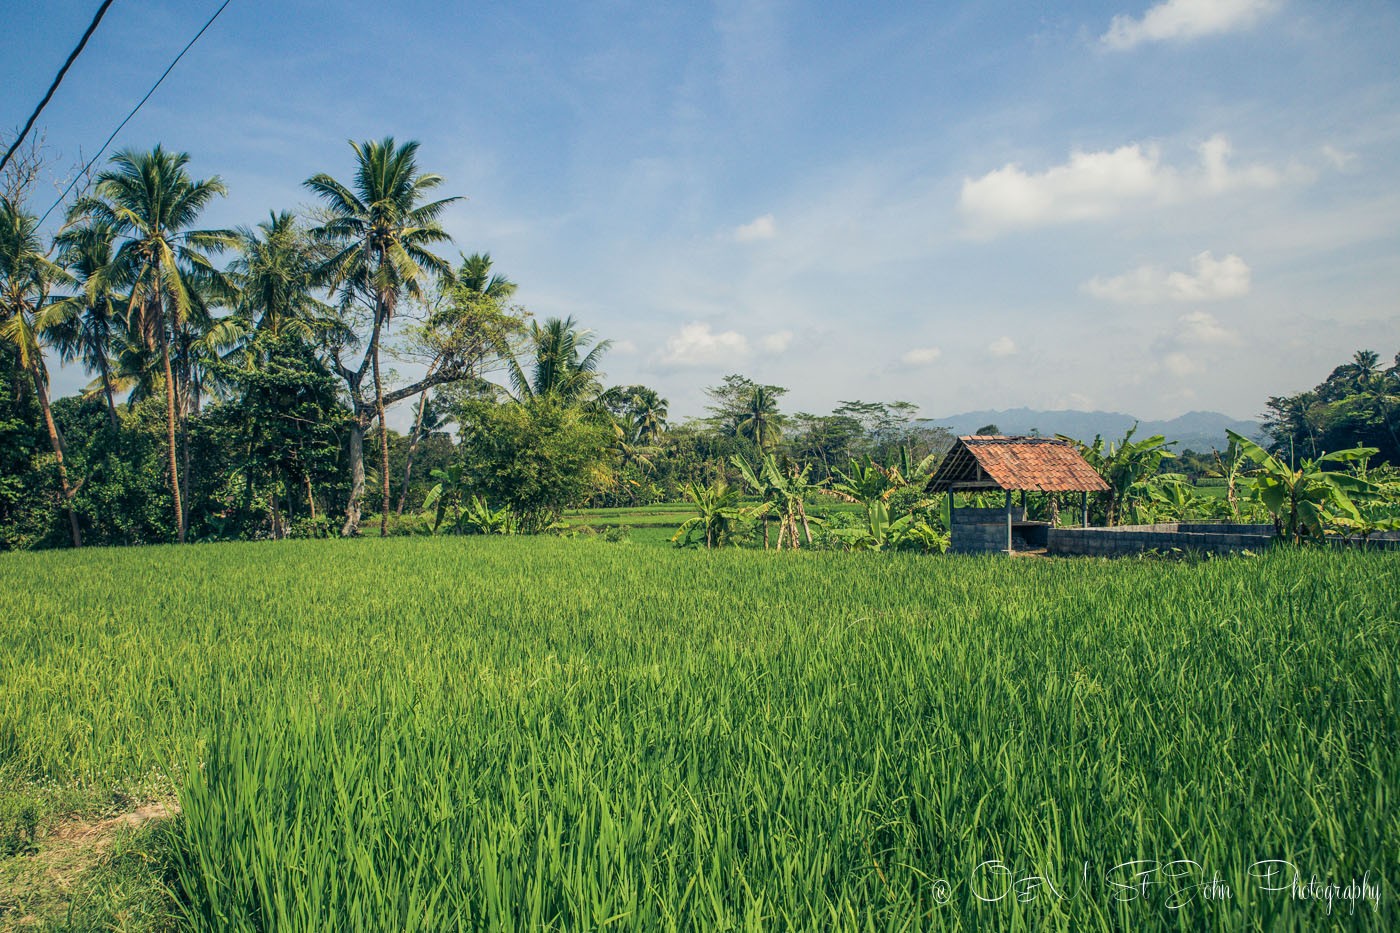 Rice paddies in Javanese country side. Central Java. 